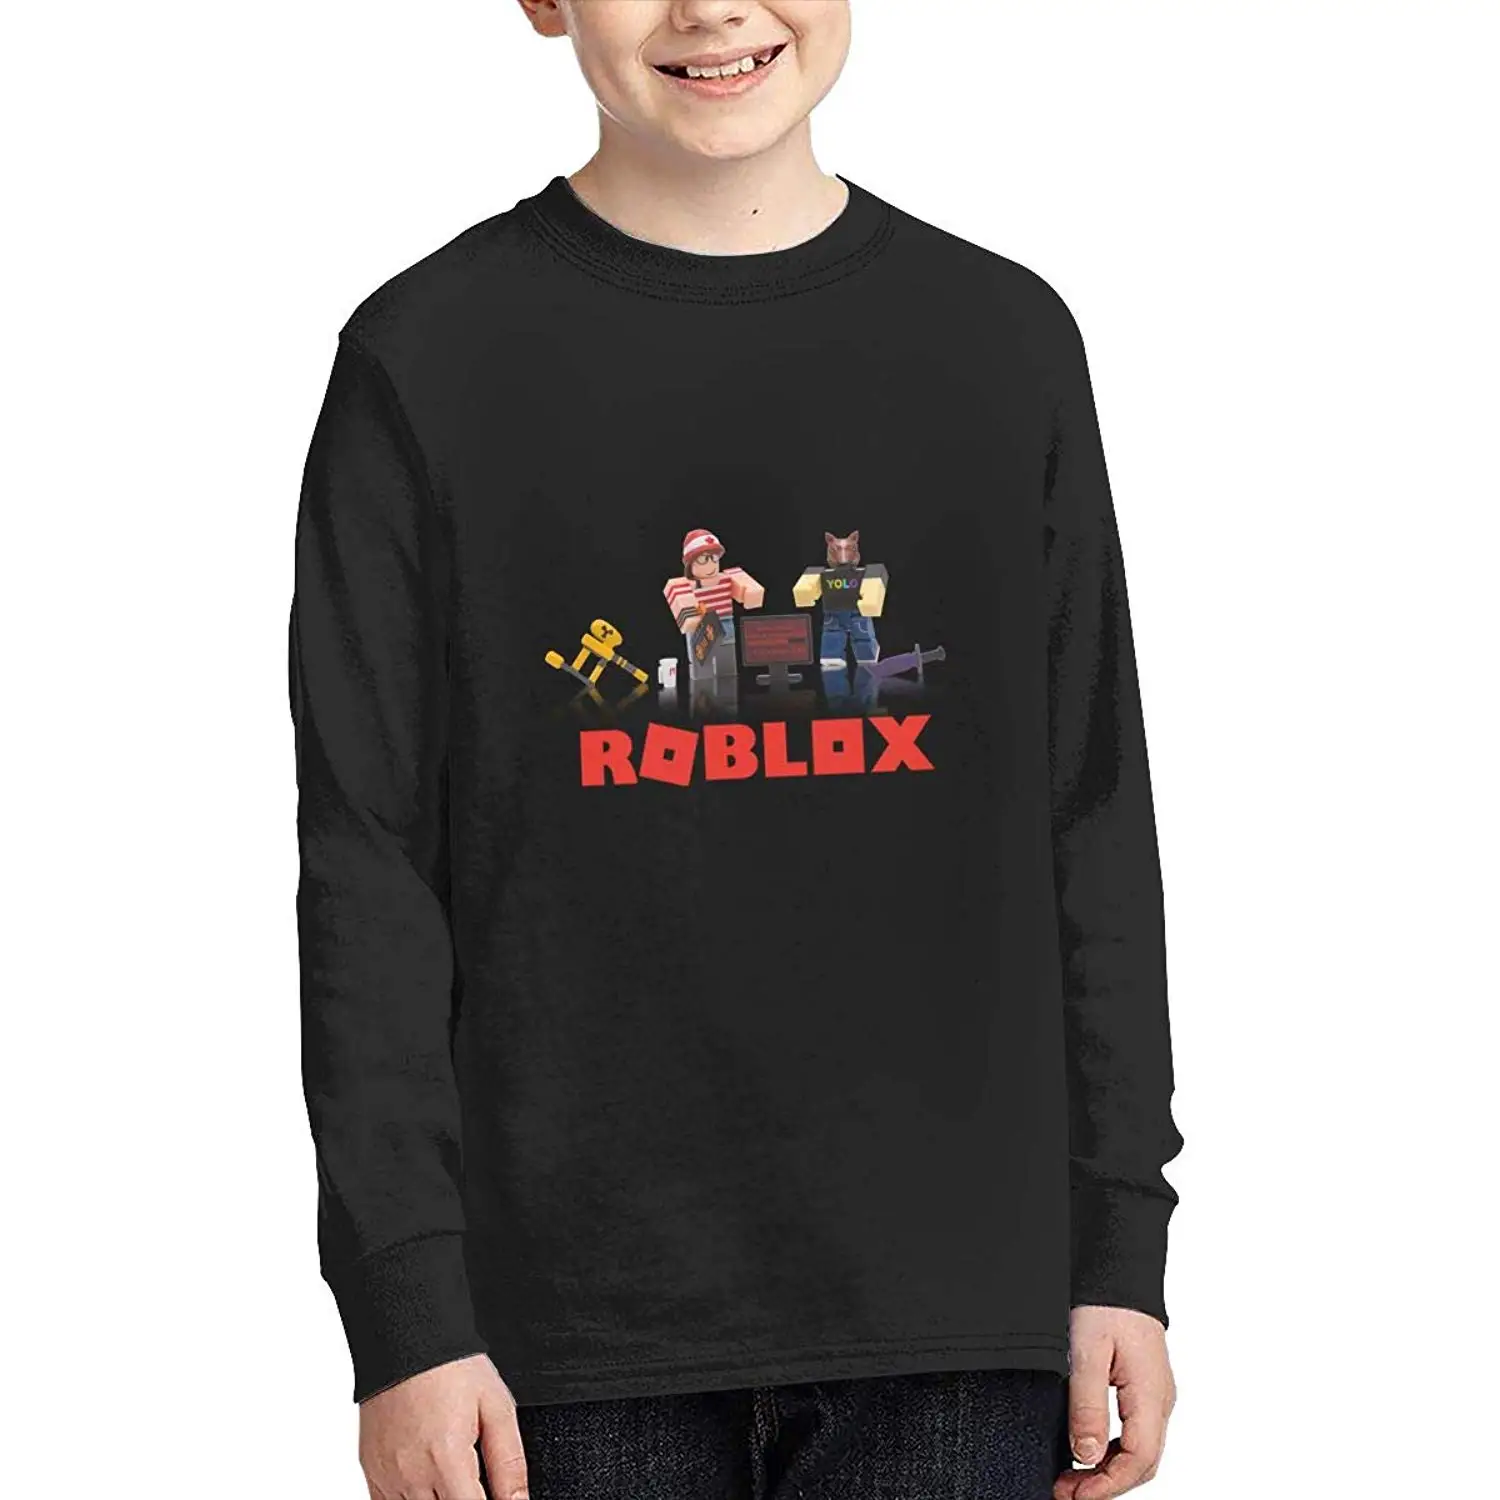 Cheap Unisex Graphic Tees Find Unisex Graphic Tees Deals On Line At Alibaba Com - buy roblox t shirt and get free shipping on aliexpress